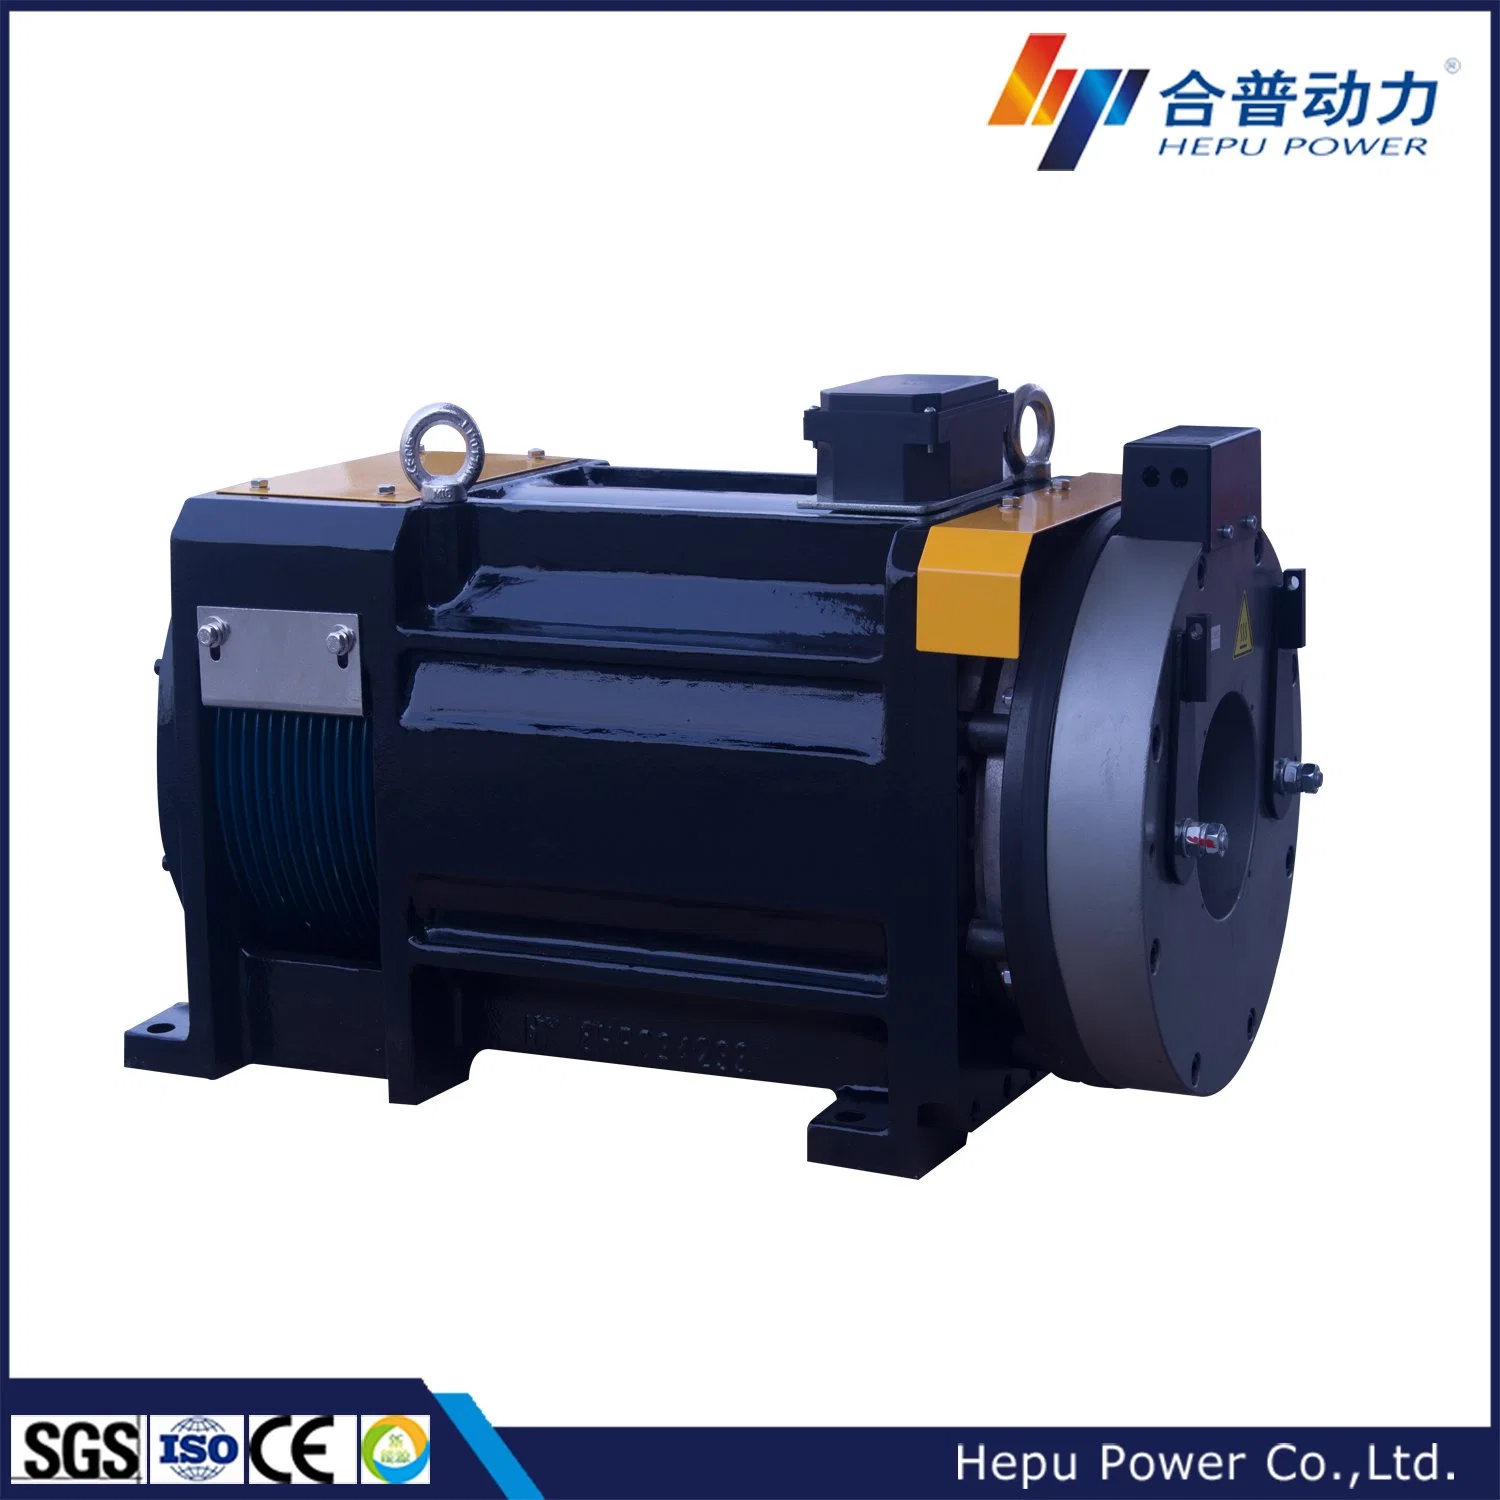 Hepu Permanent Magnet Synchronous Gearless Traction Machine Brake DC110V Elevator Parts